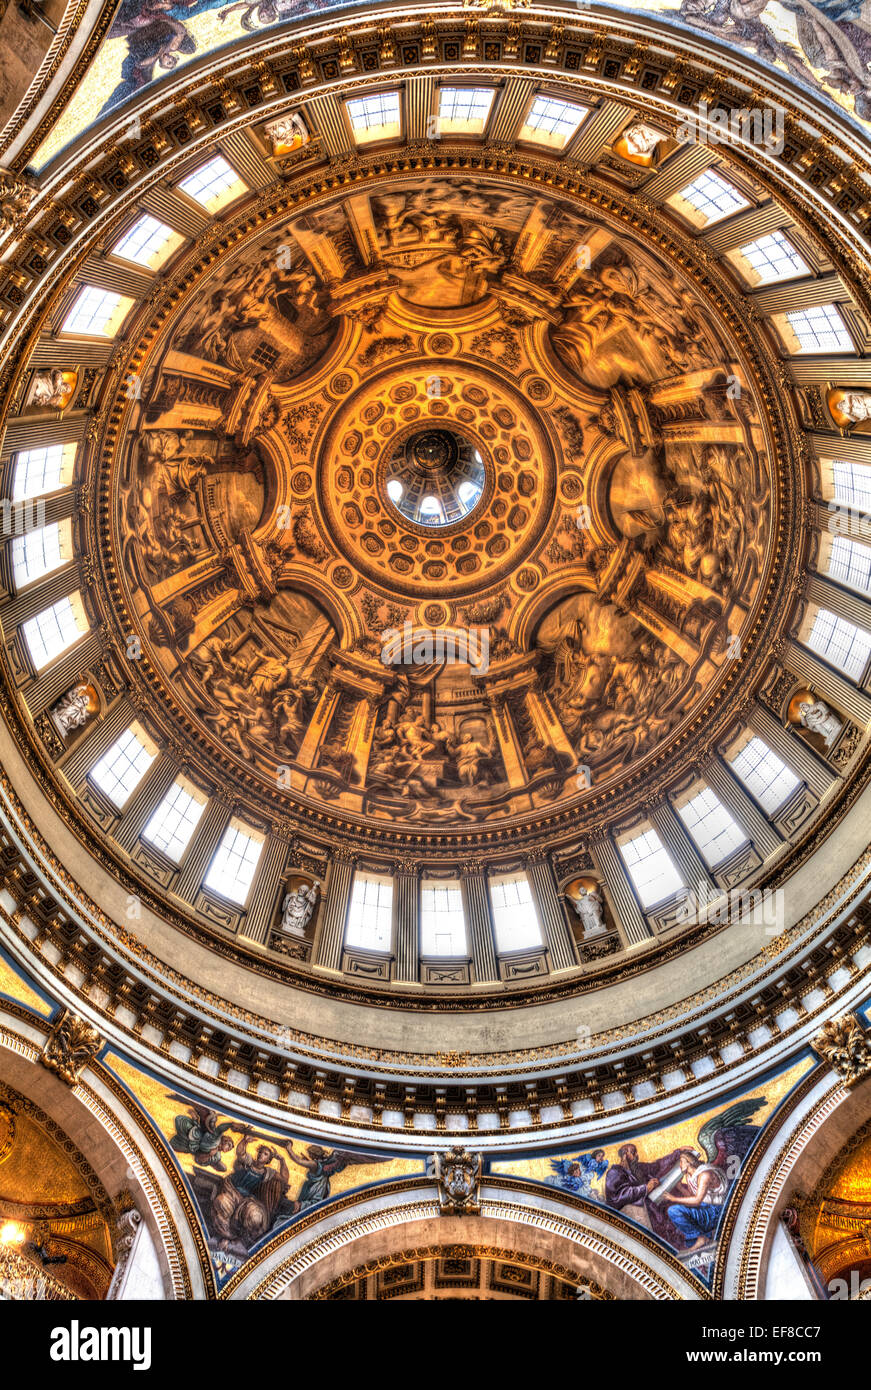 The inner dome of St Paul's Cathedral, London, England Stock Photo